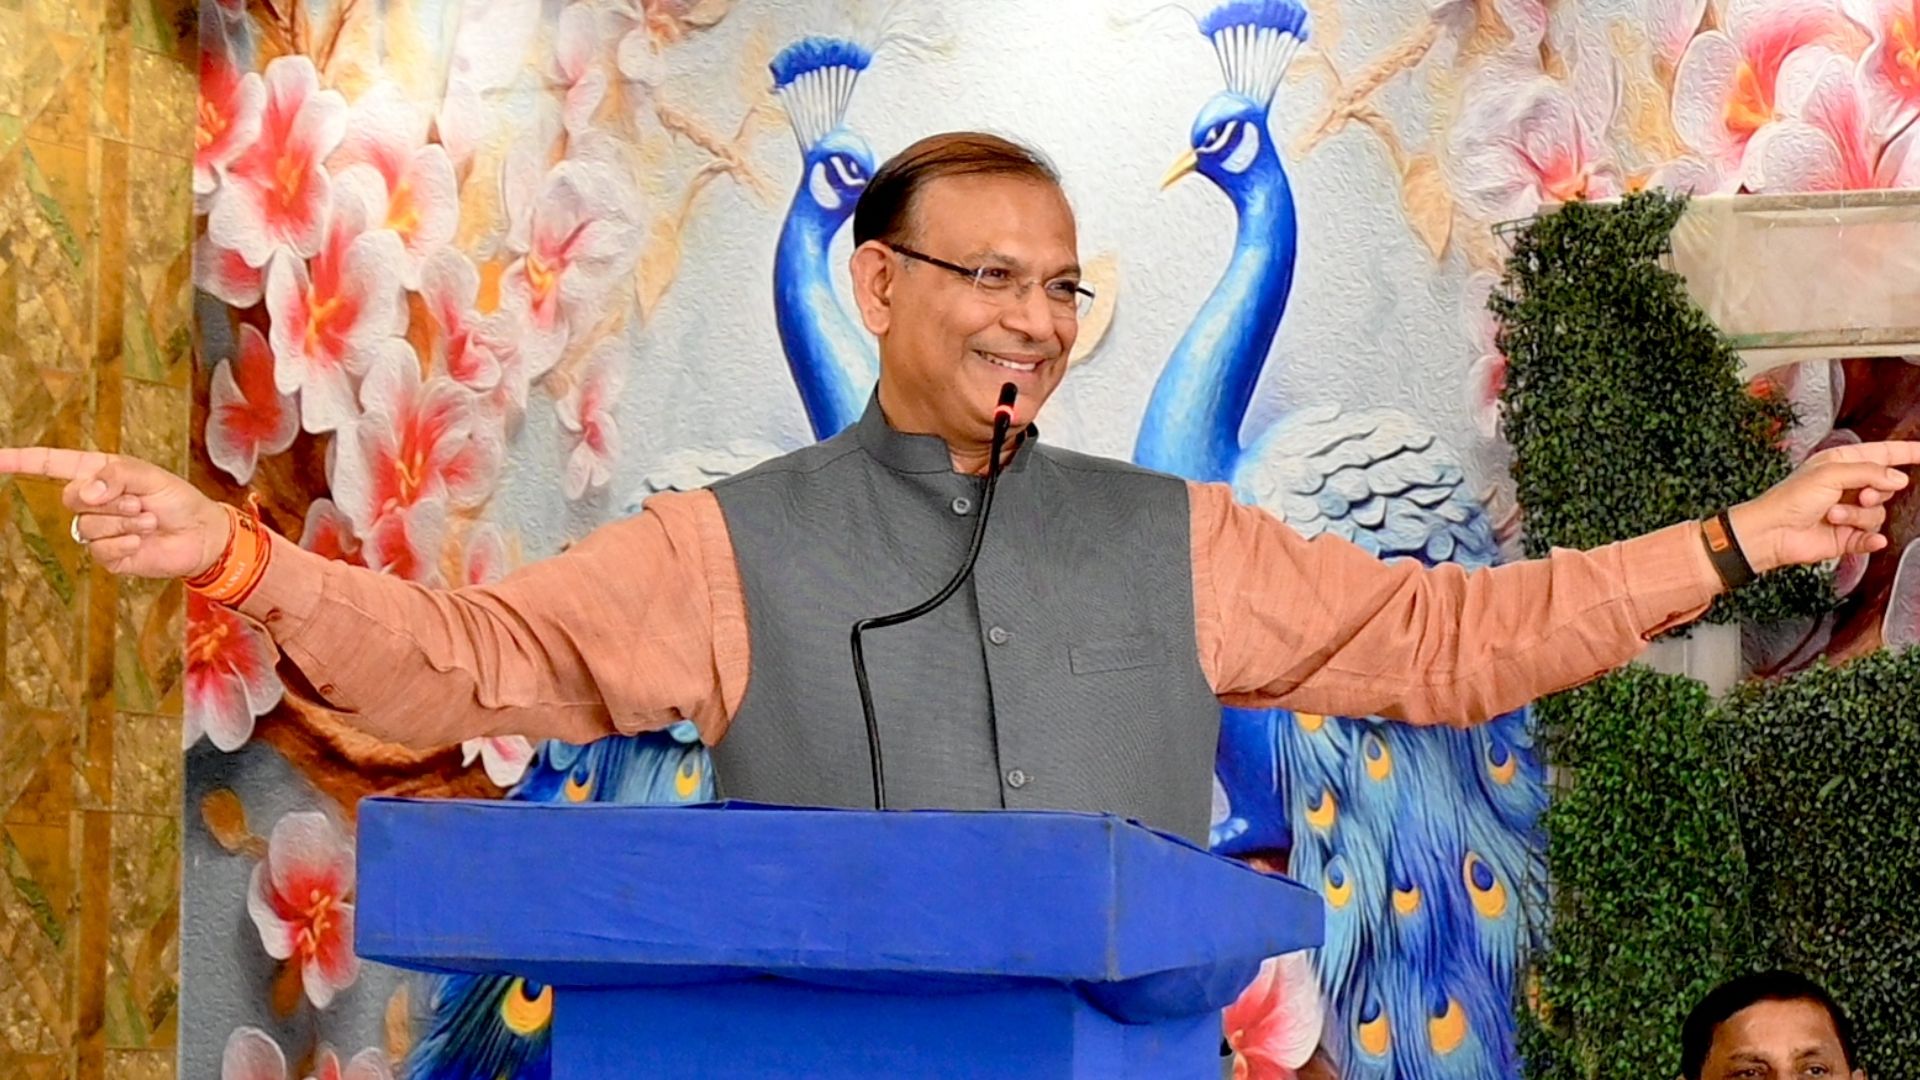 BJP MP Jayant Sinha Responds To Party’s Show-Cause Notice, Denies Unjust Targeting